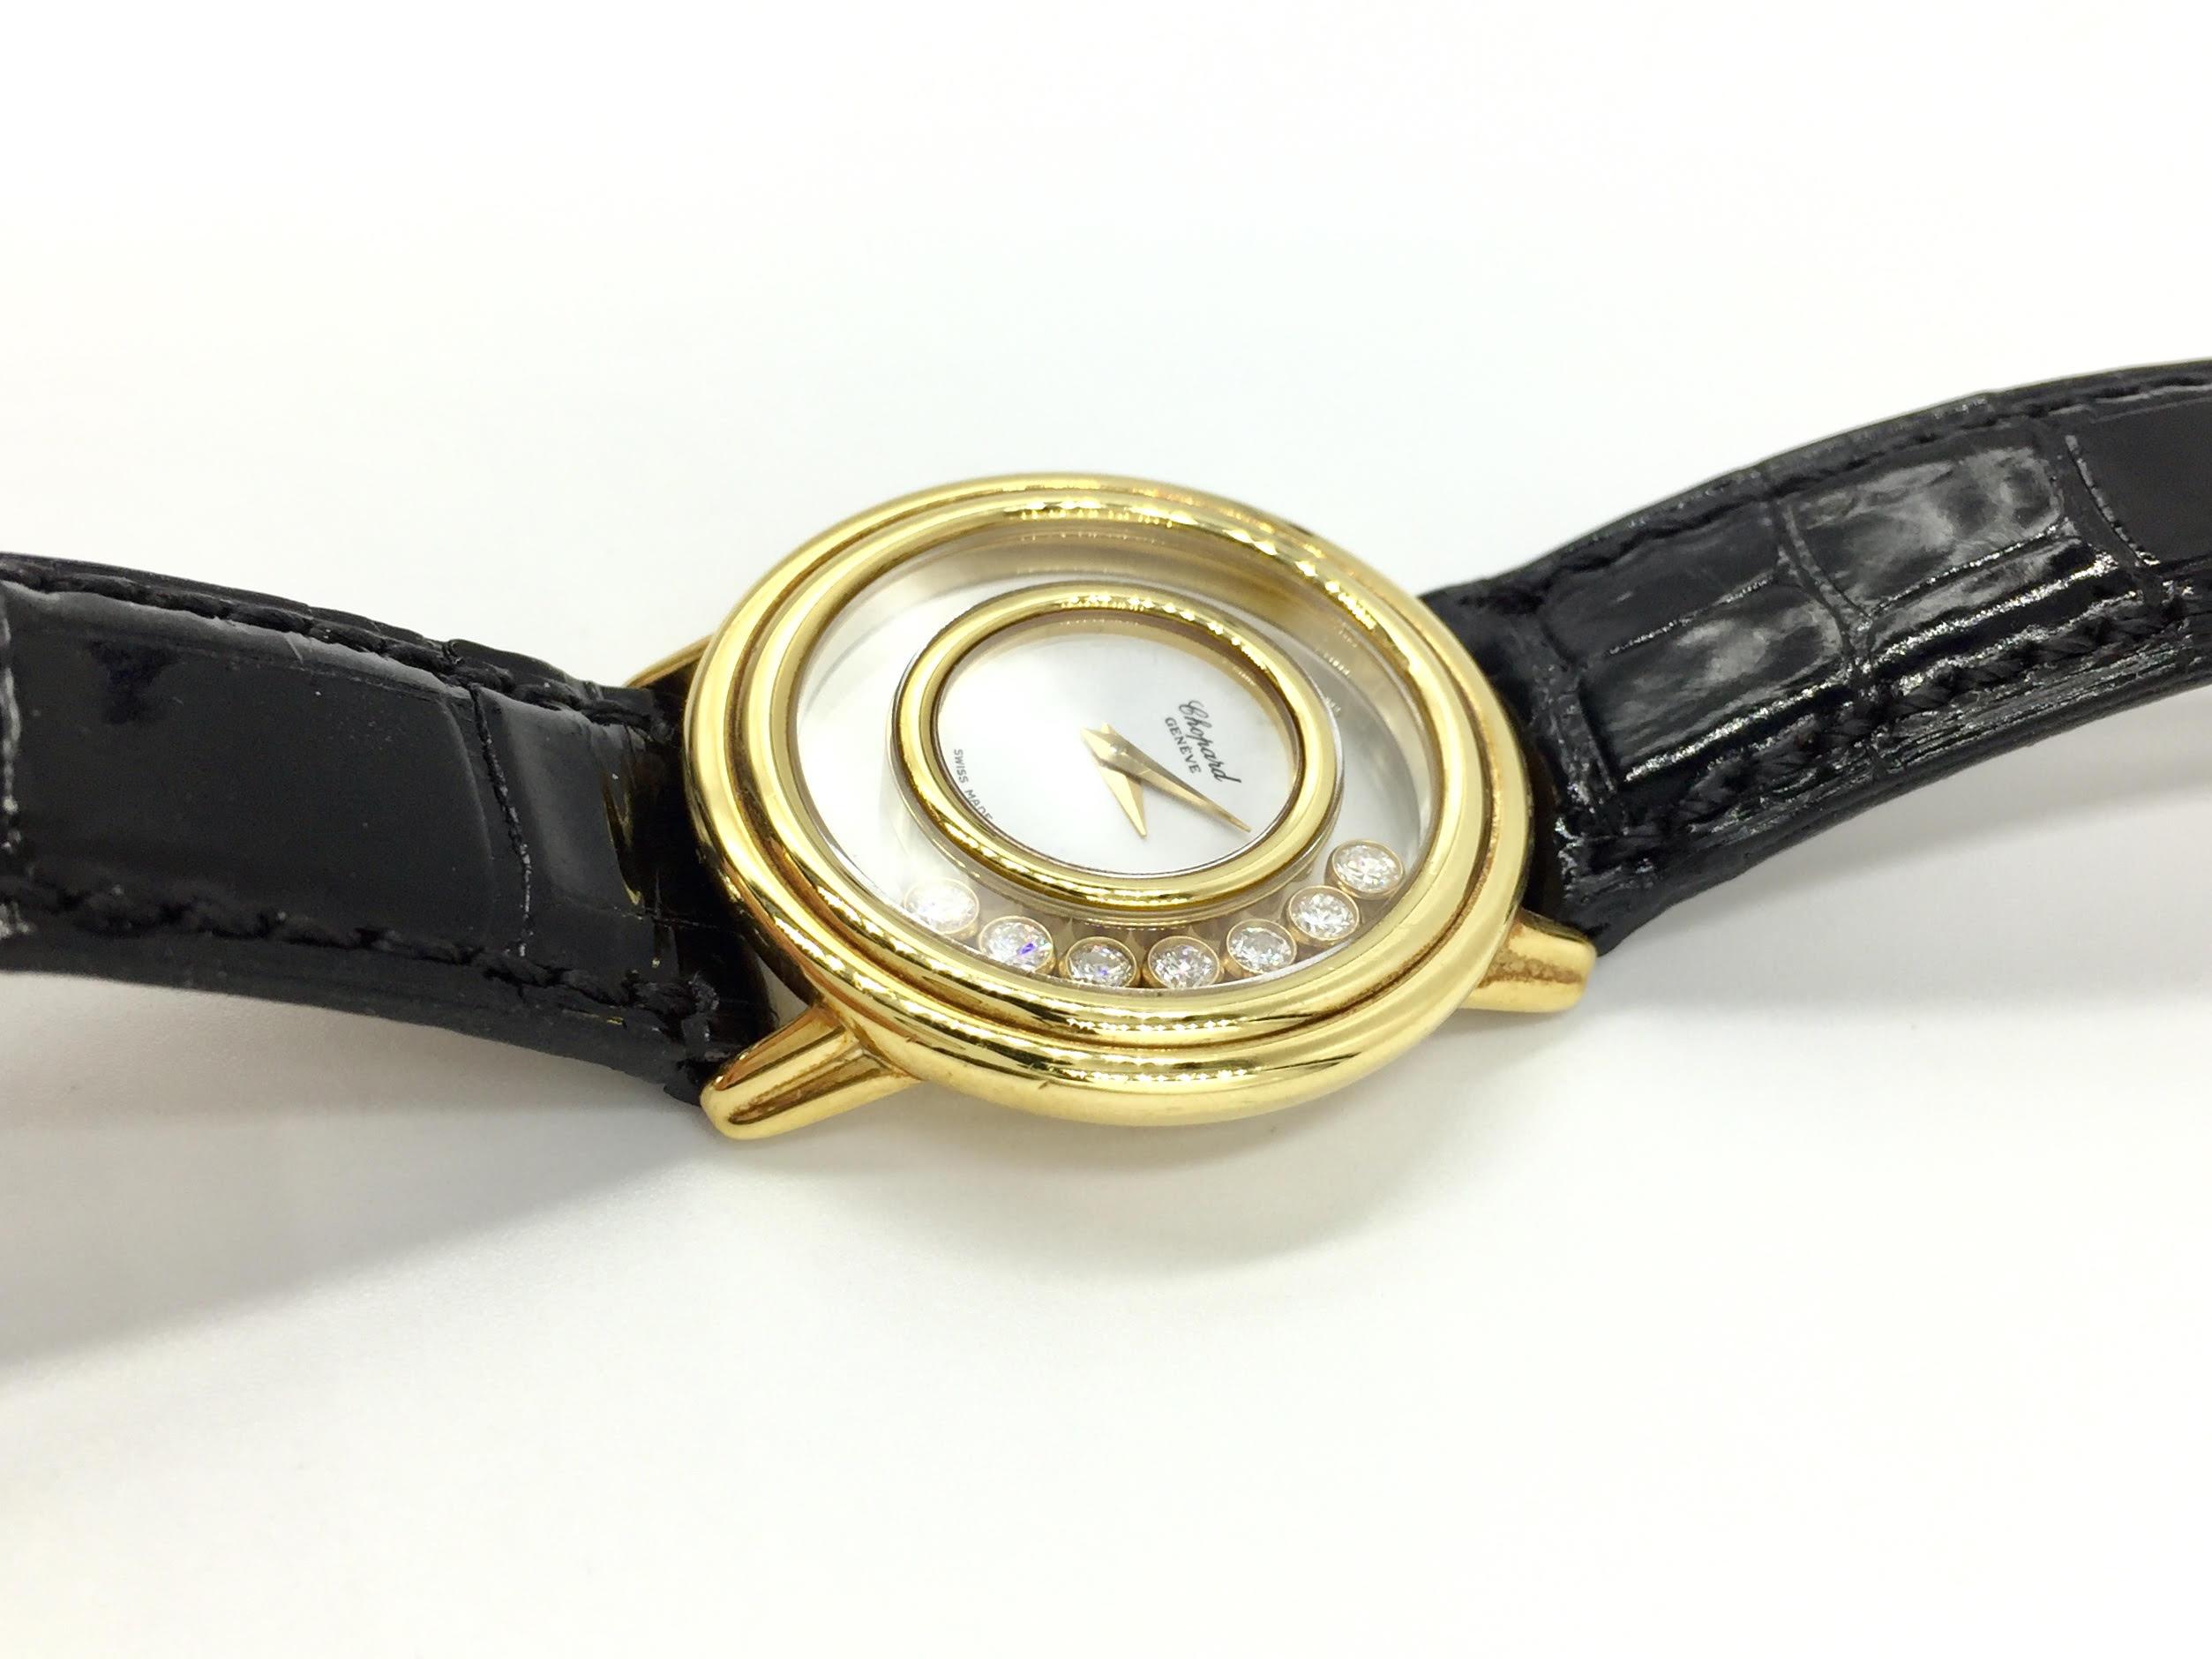 Stylish, sophisticated and classic with a unique design. This Chopard 